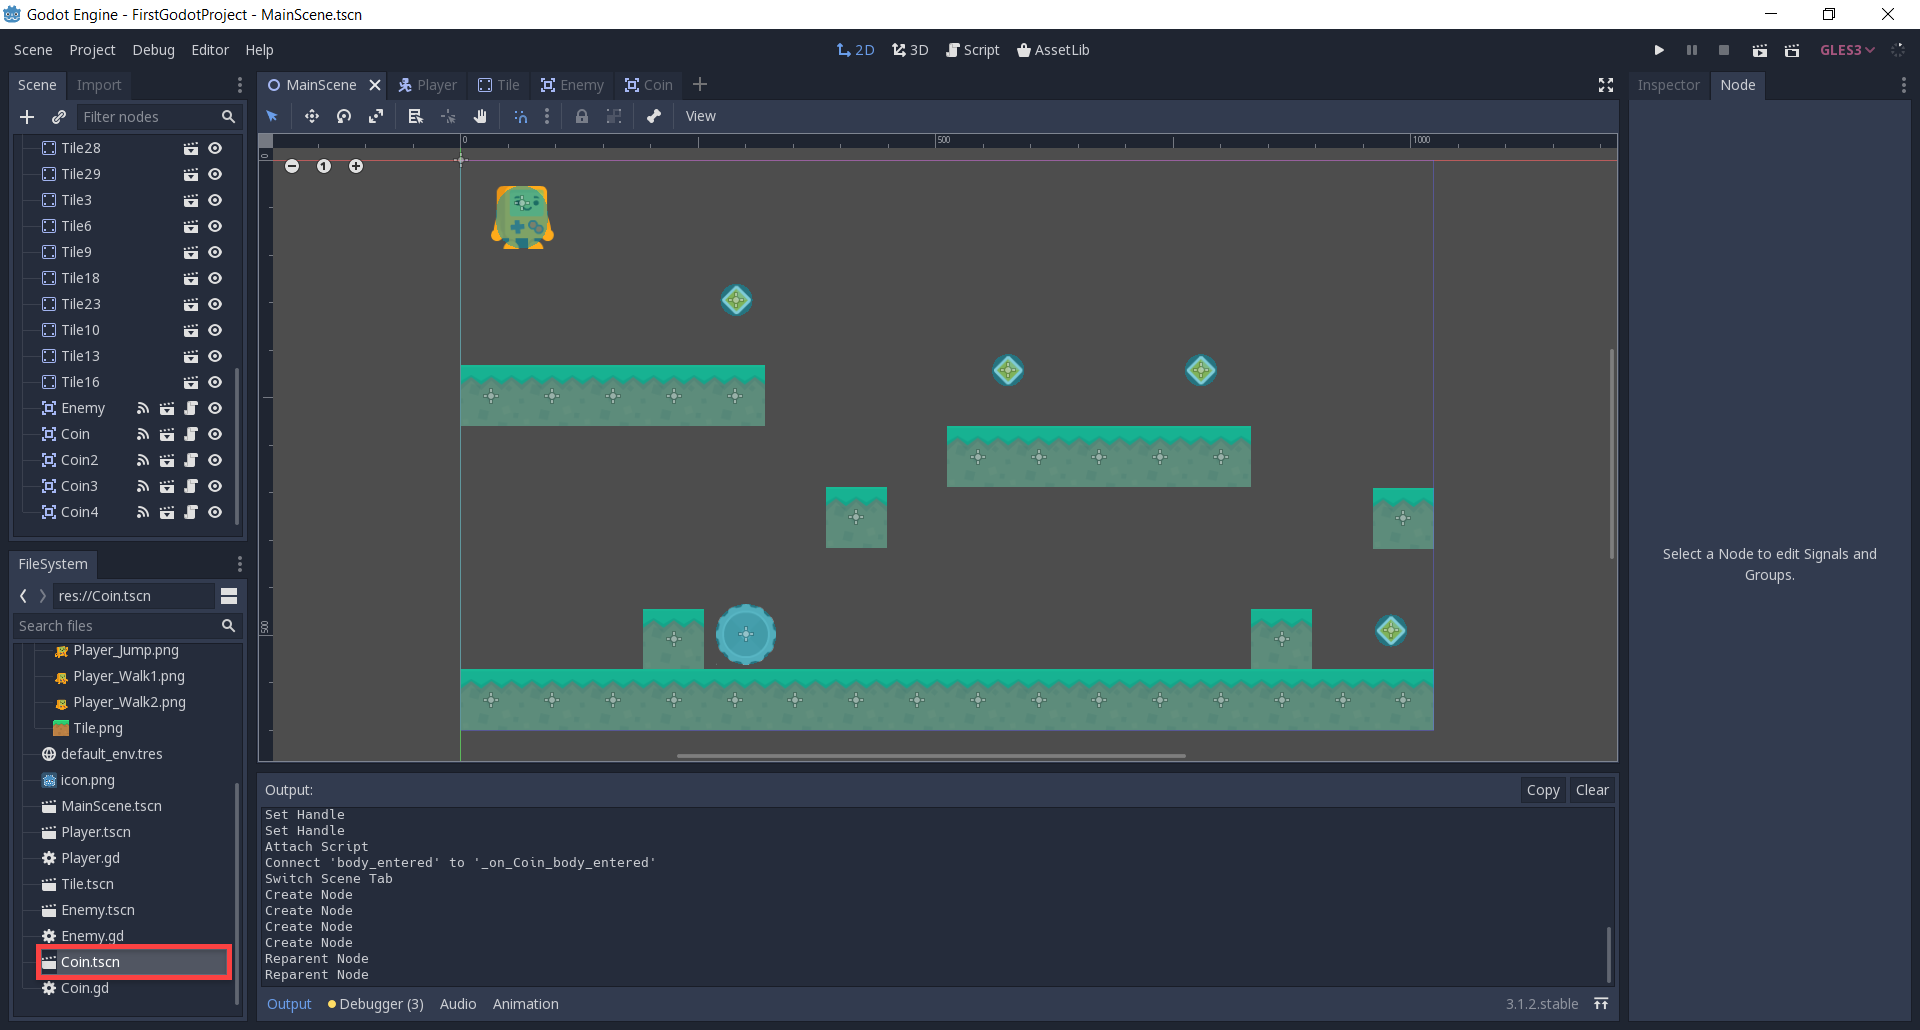 Godot with Coin added to 2D platformer level